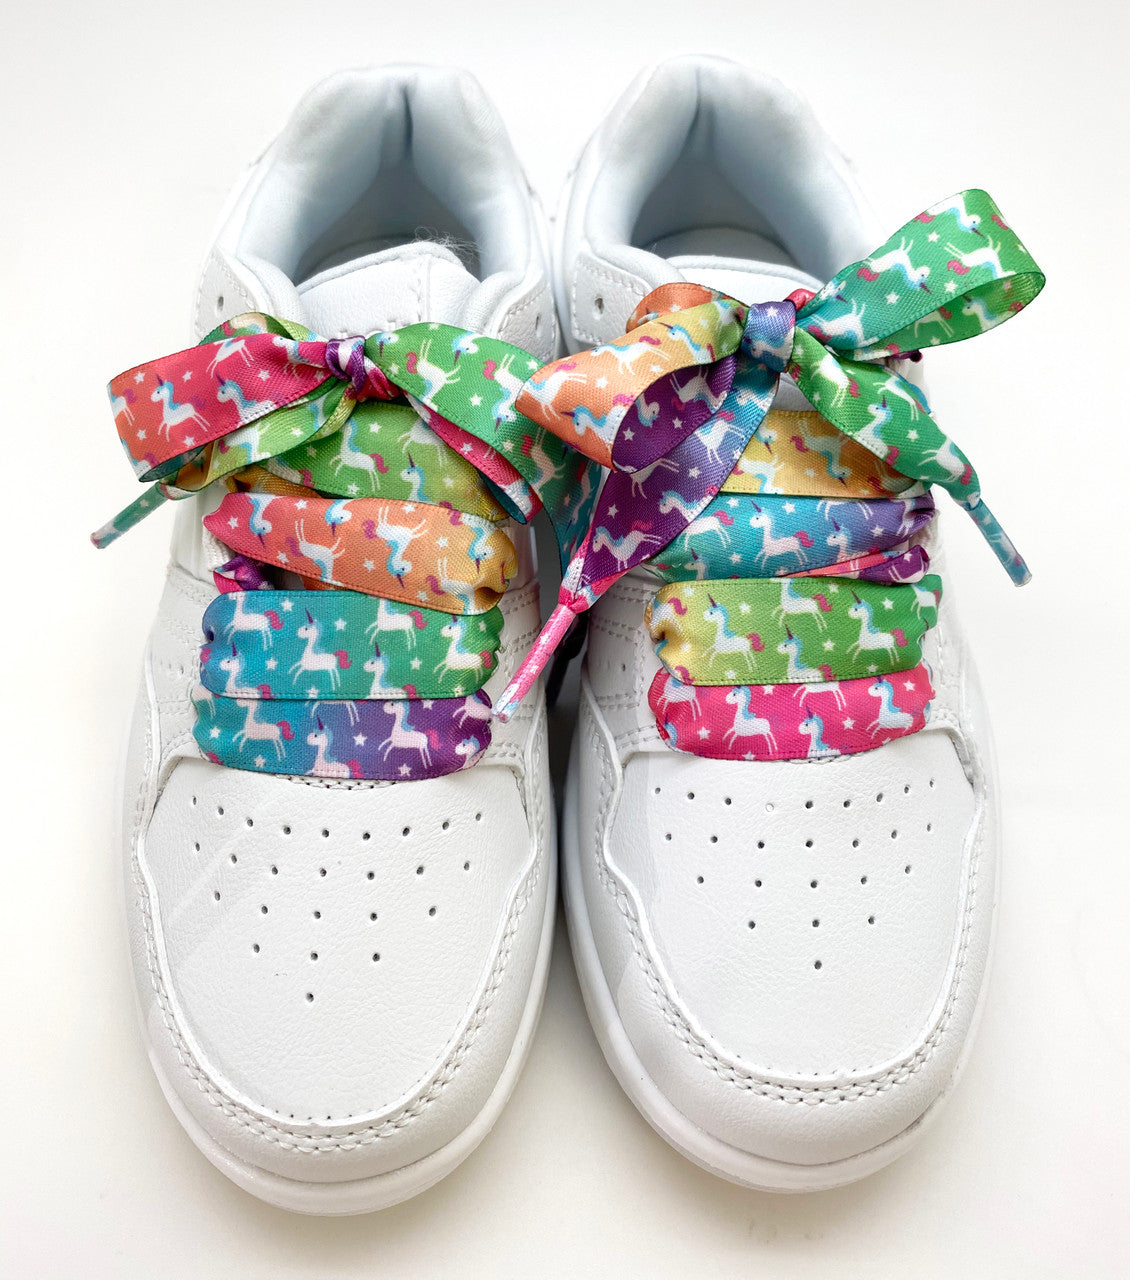 Satin shoelaces Unicorn  design is perfect for adding some fun and fashion to your sneakers! This is a great shoelace for fun dance shoes, wedding shoes, cheerleading and recitals! All our ribbon shoelaces are printed using dye sublimation technology and can be washed, ironed and re-used! All our laces are designed and printed in the USA